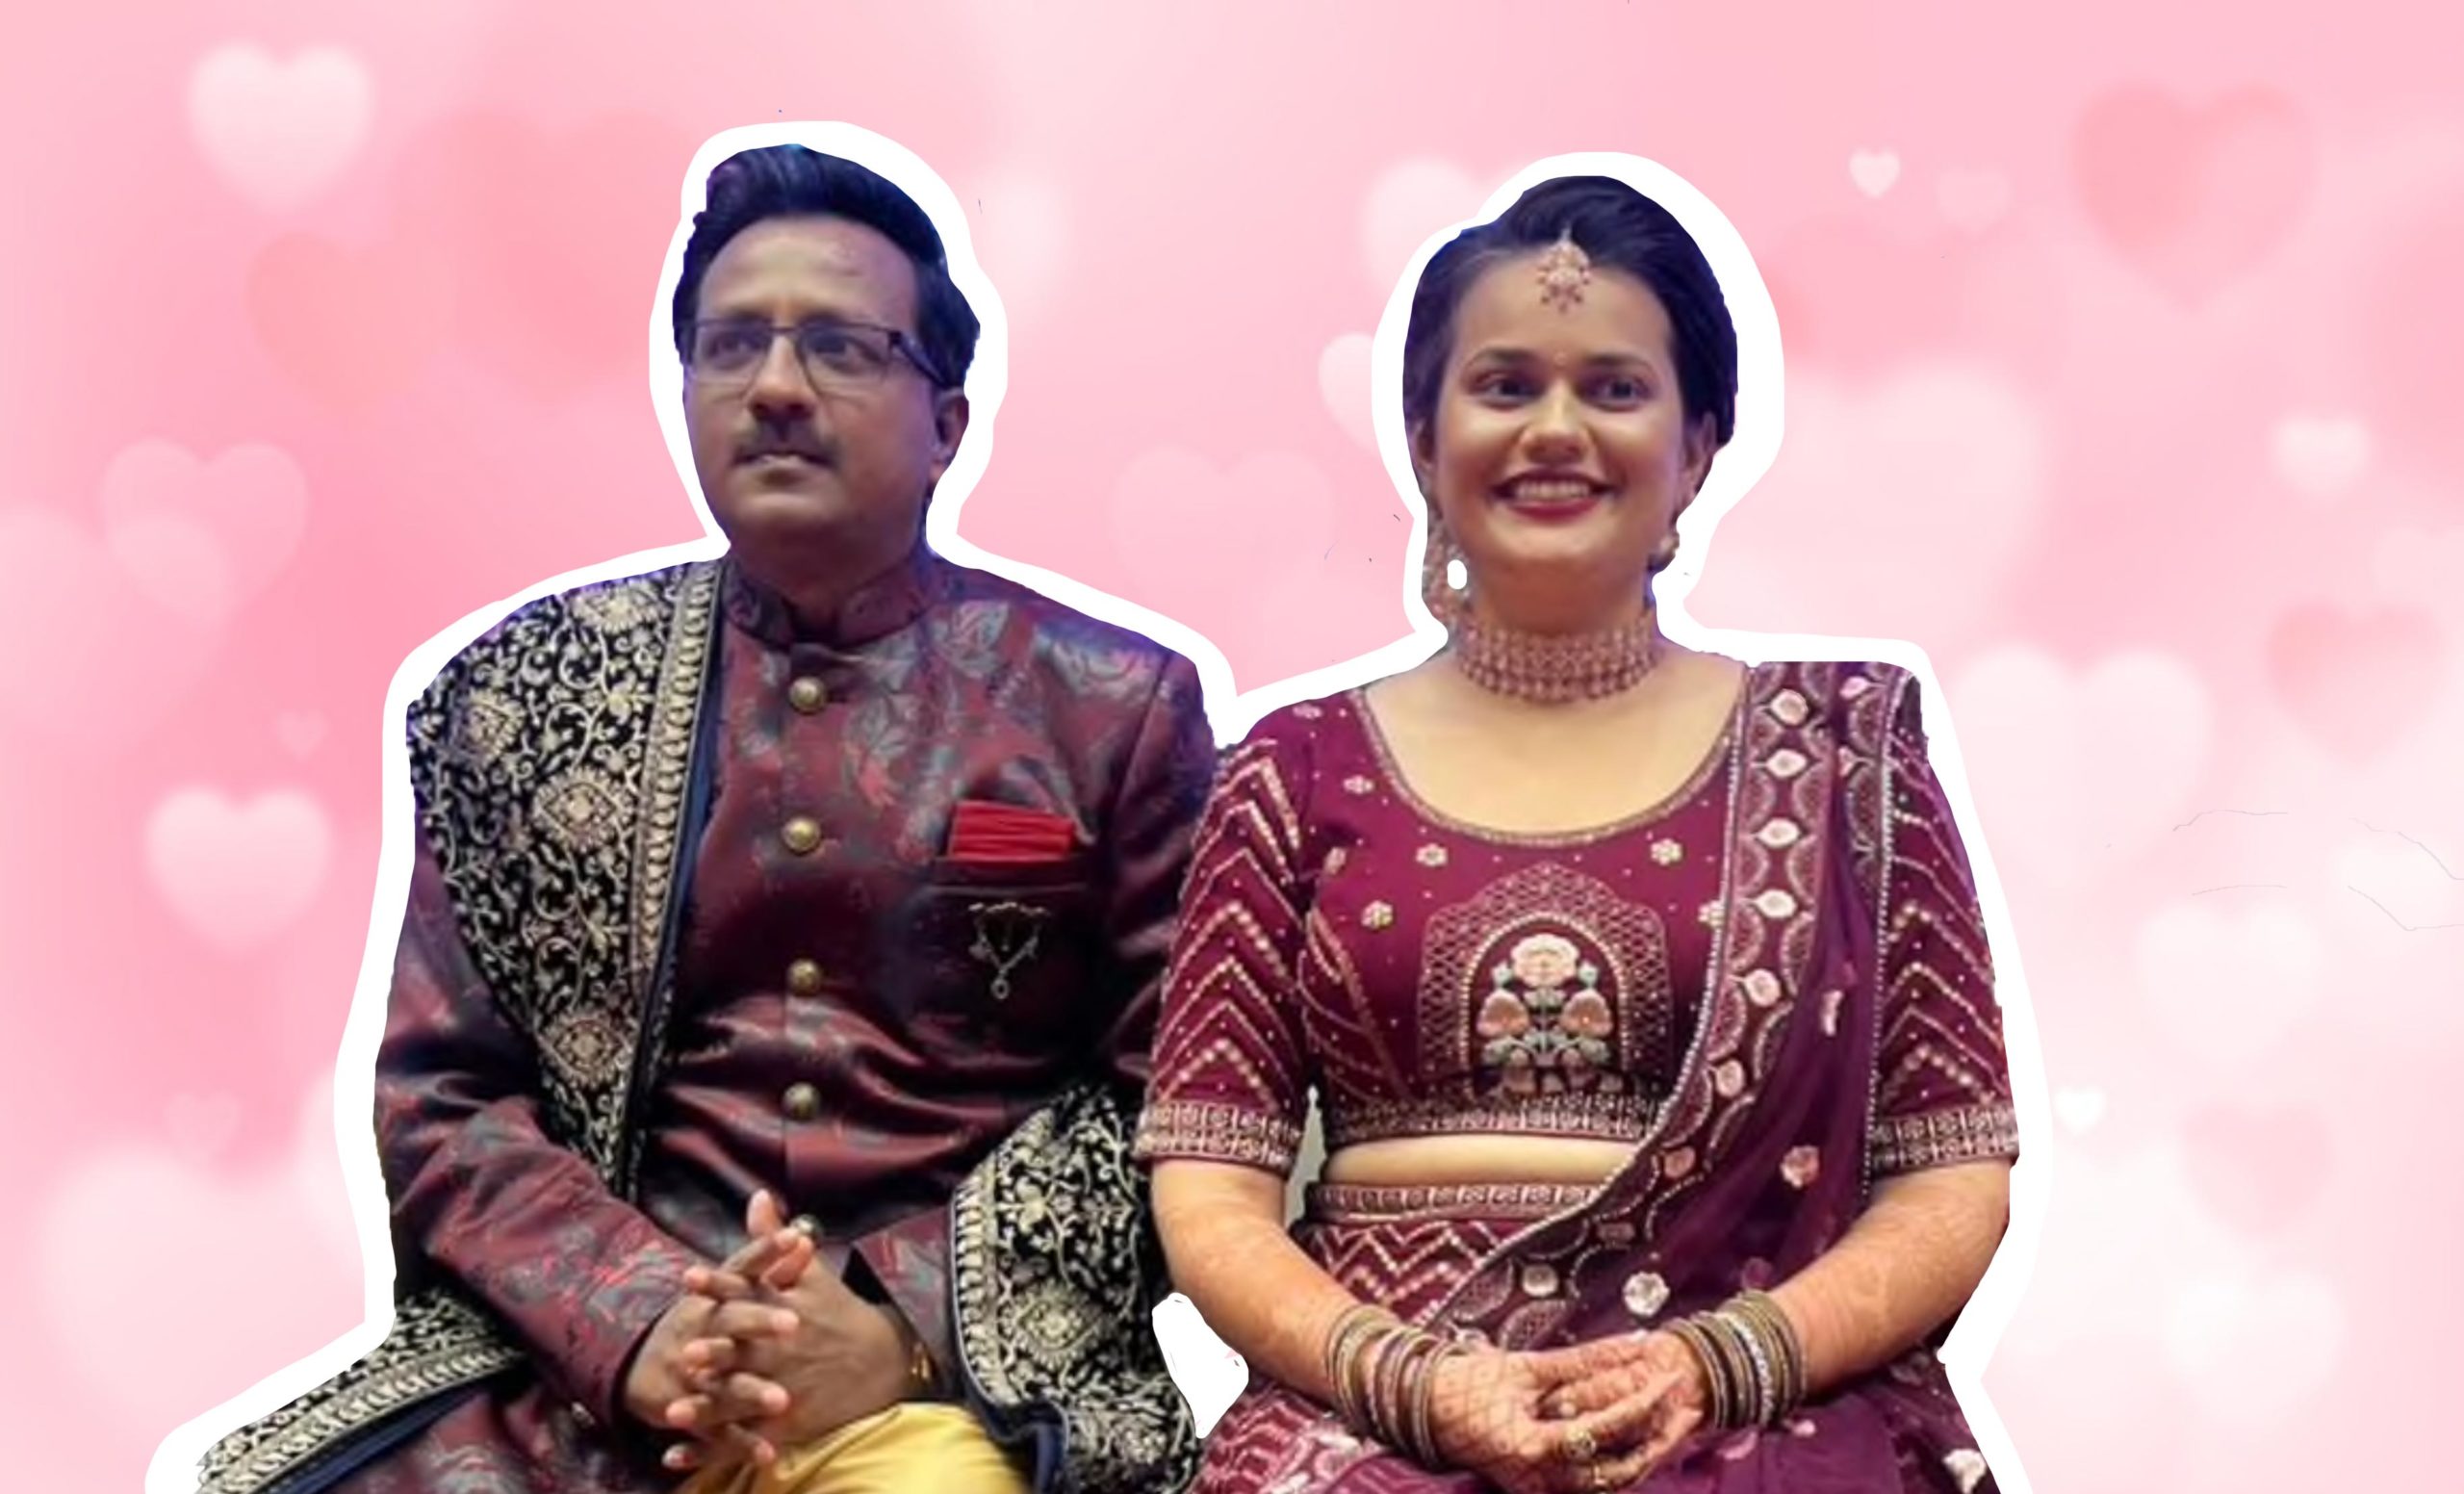 IAS Officer Tina Dabi Ties The Knot With Pradeep Gawande In An Intimate Wedding Ceremony. We Love These Pictures Of The Couple